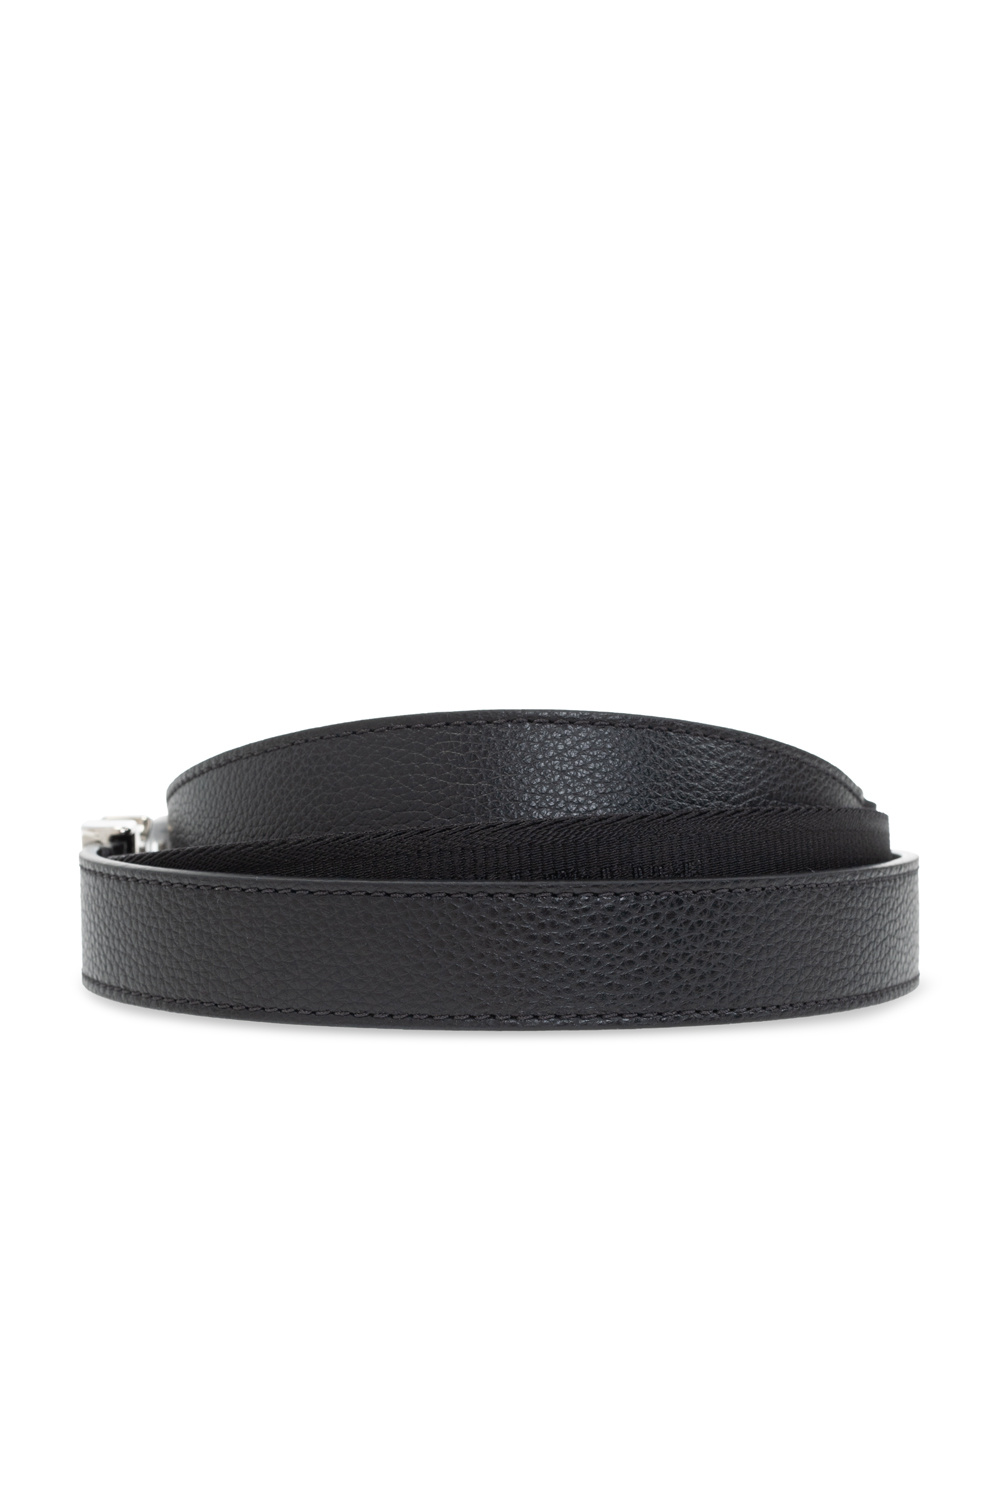 Givenchy Belt with logo | Men's Accessories | Vitkac